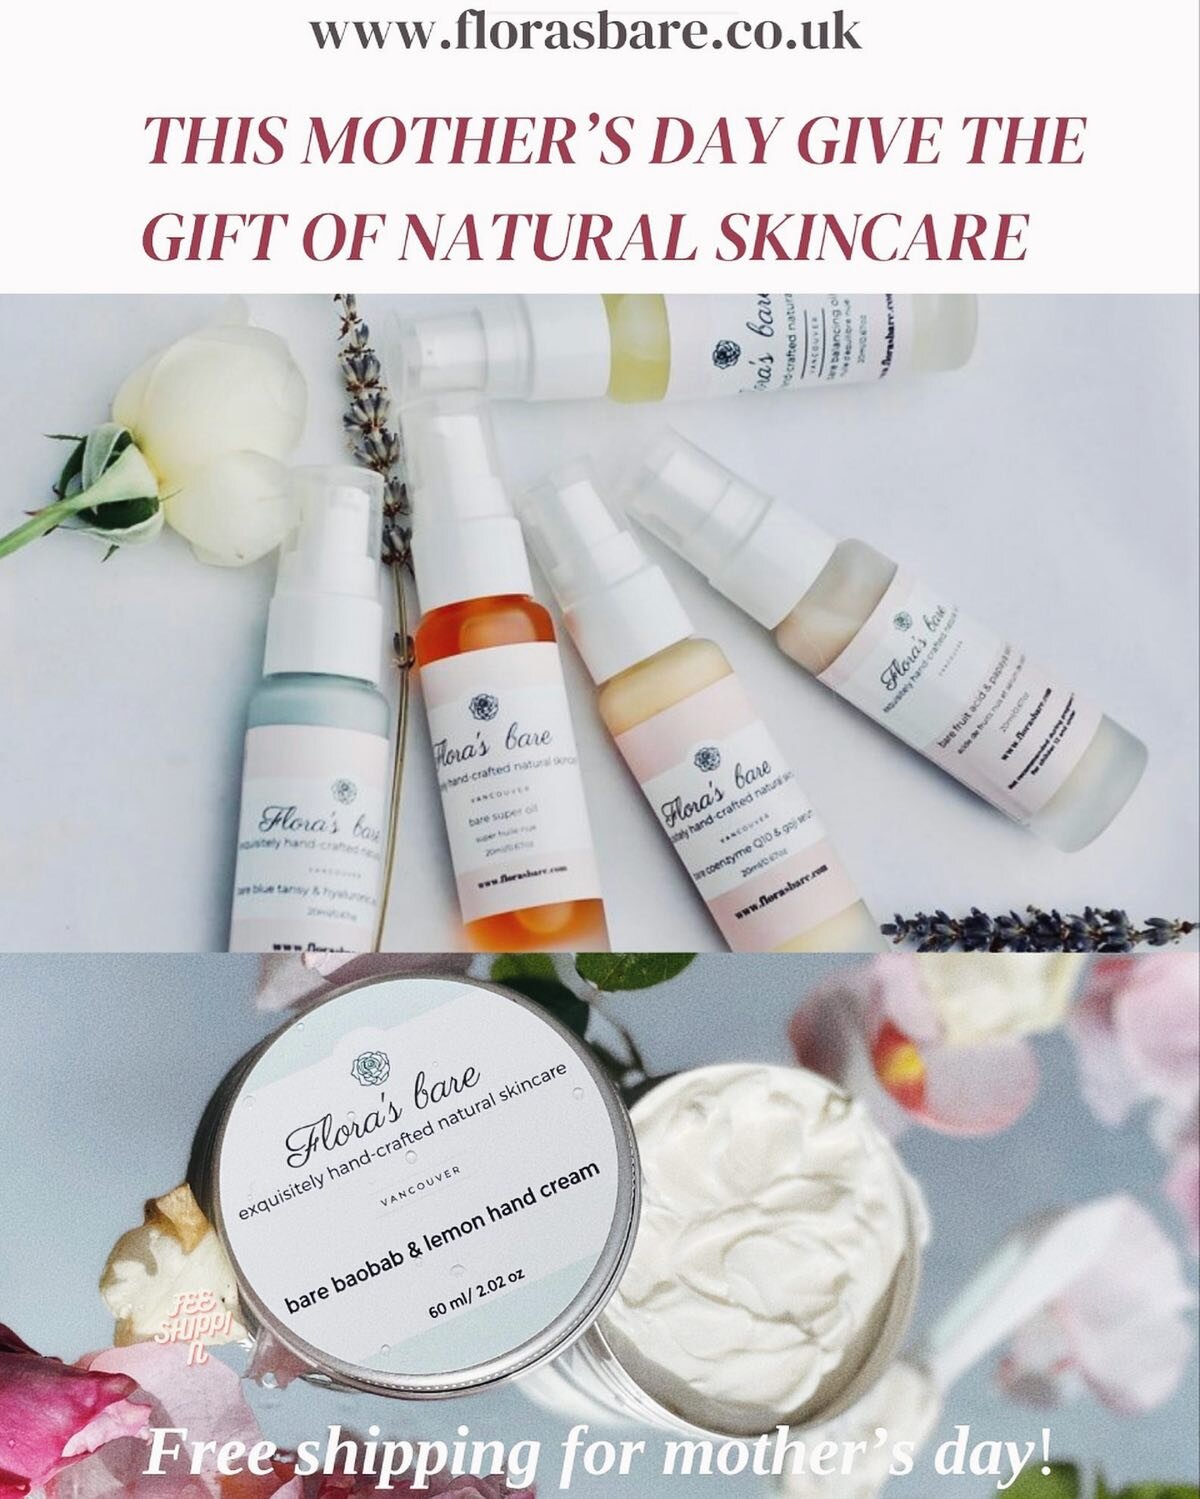 Mother&rsquo;s Day March 10th in the UK, give the gift of natural skincare and enjoy free shipping until March 15th 💗

www.florasbare.co.uk

#mothersday 
#givethegiftofnaturalskincare#globalgreenbeautyawards #spatreatments 
#facialtreatments
#beauty